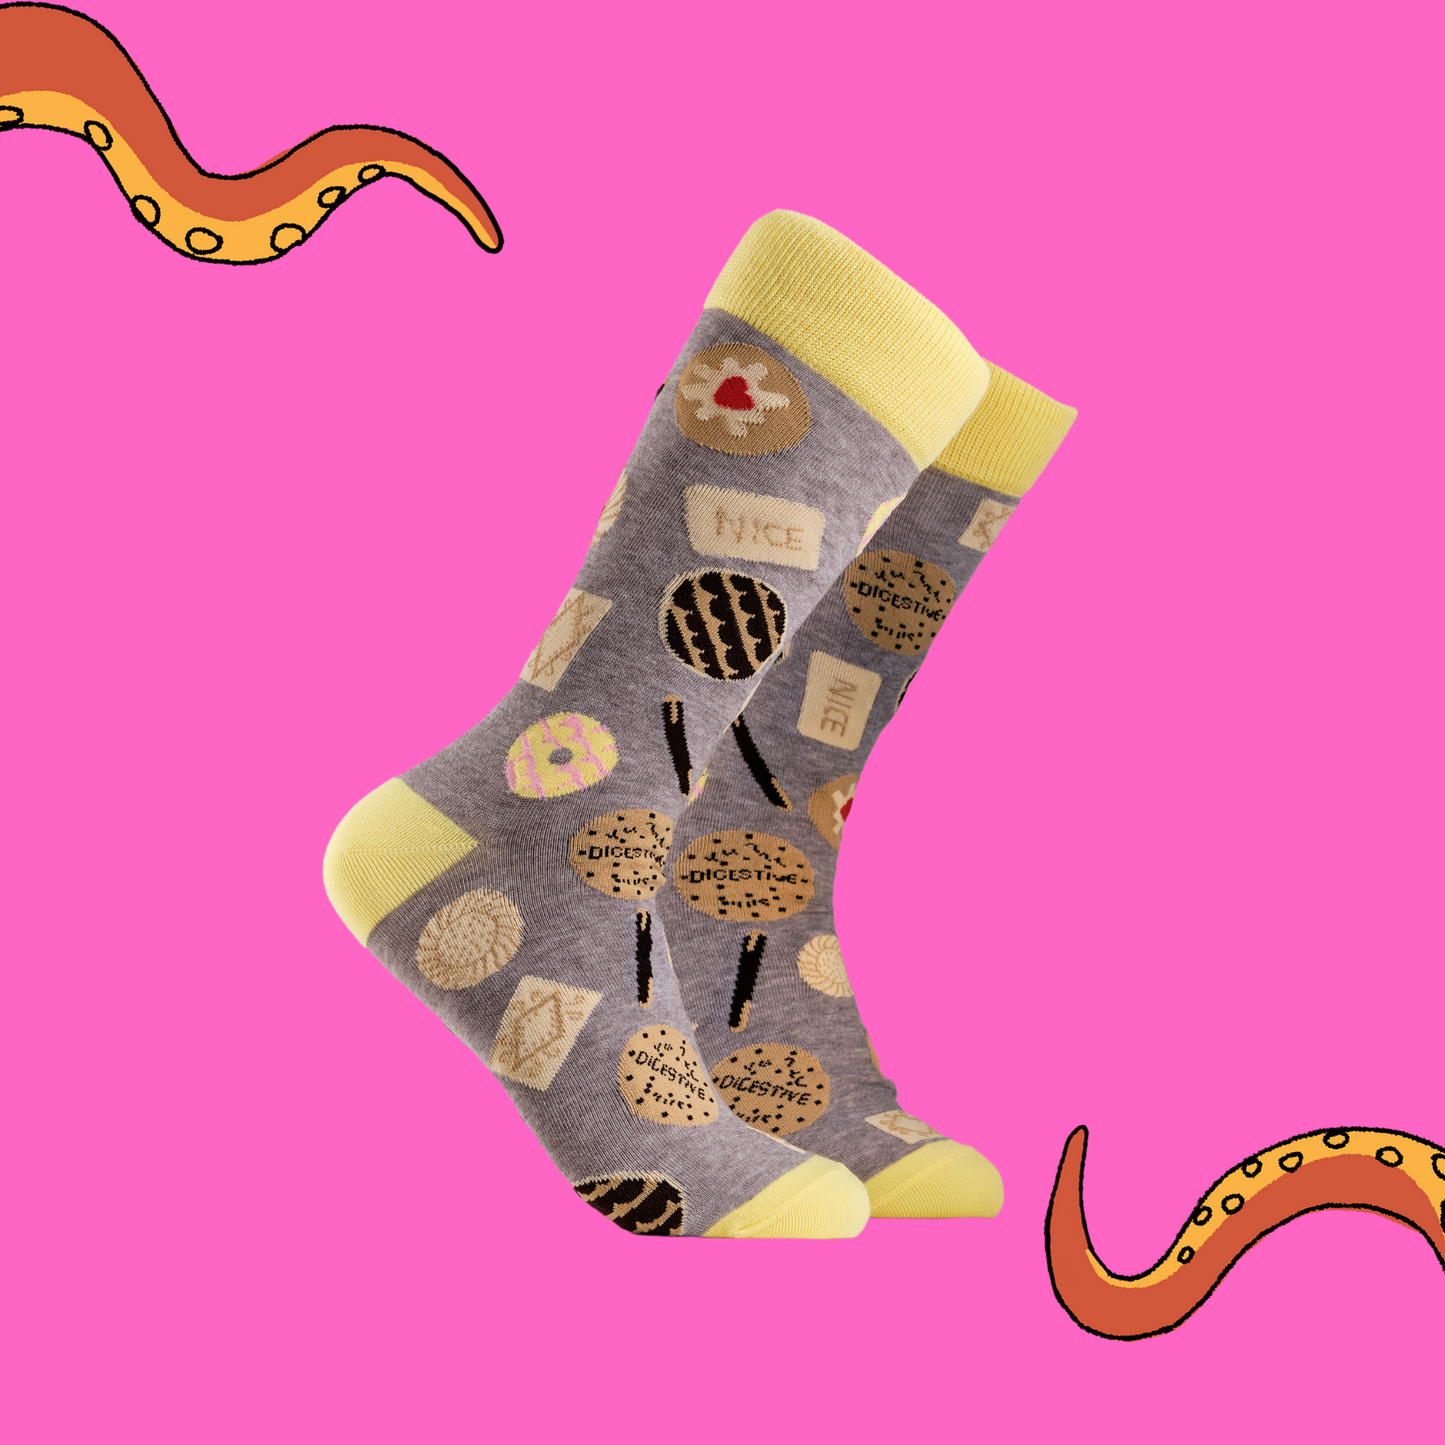 Biscuits Socks. A pair of socks depicting retro and classic British biscuits. Grey legs, yellow cuff, heel and toe.